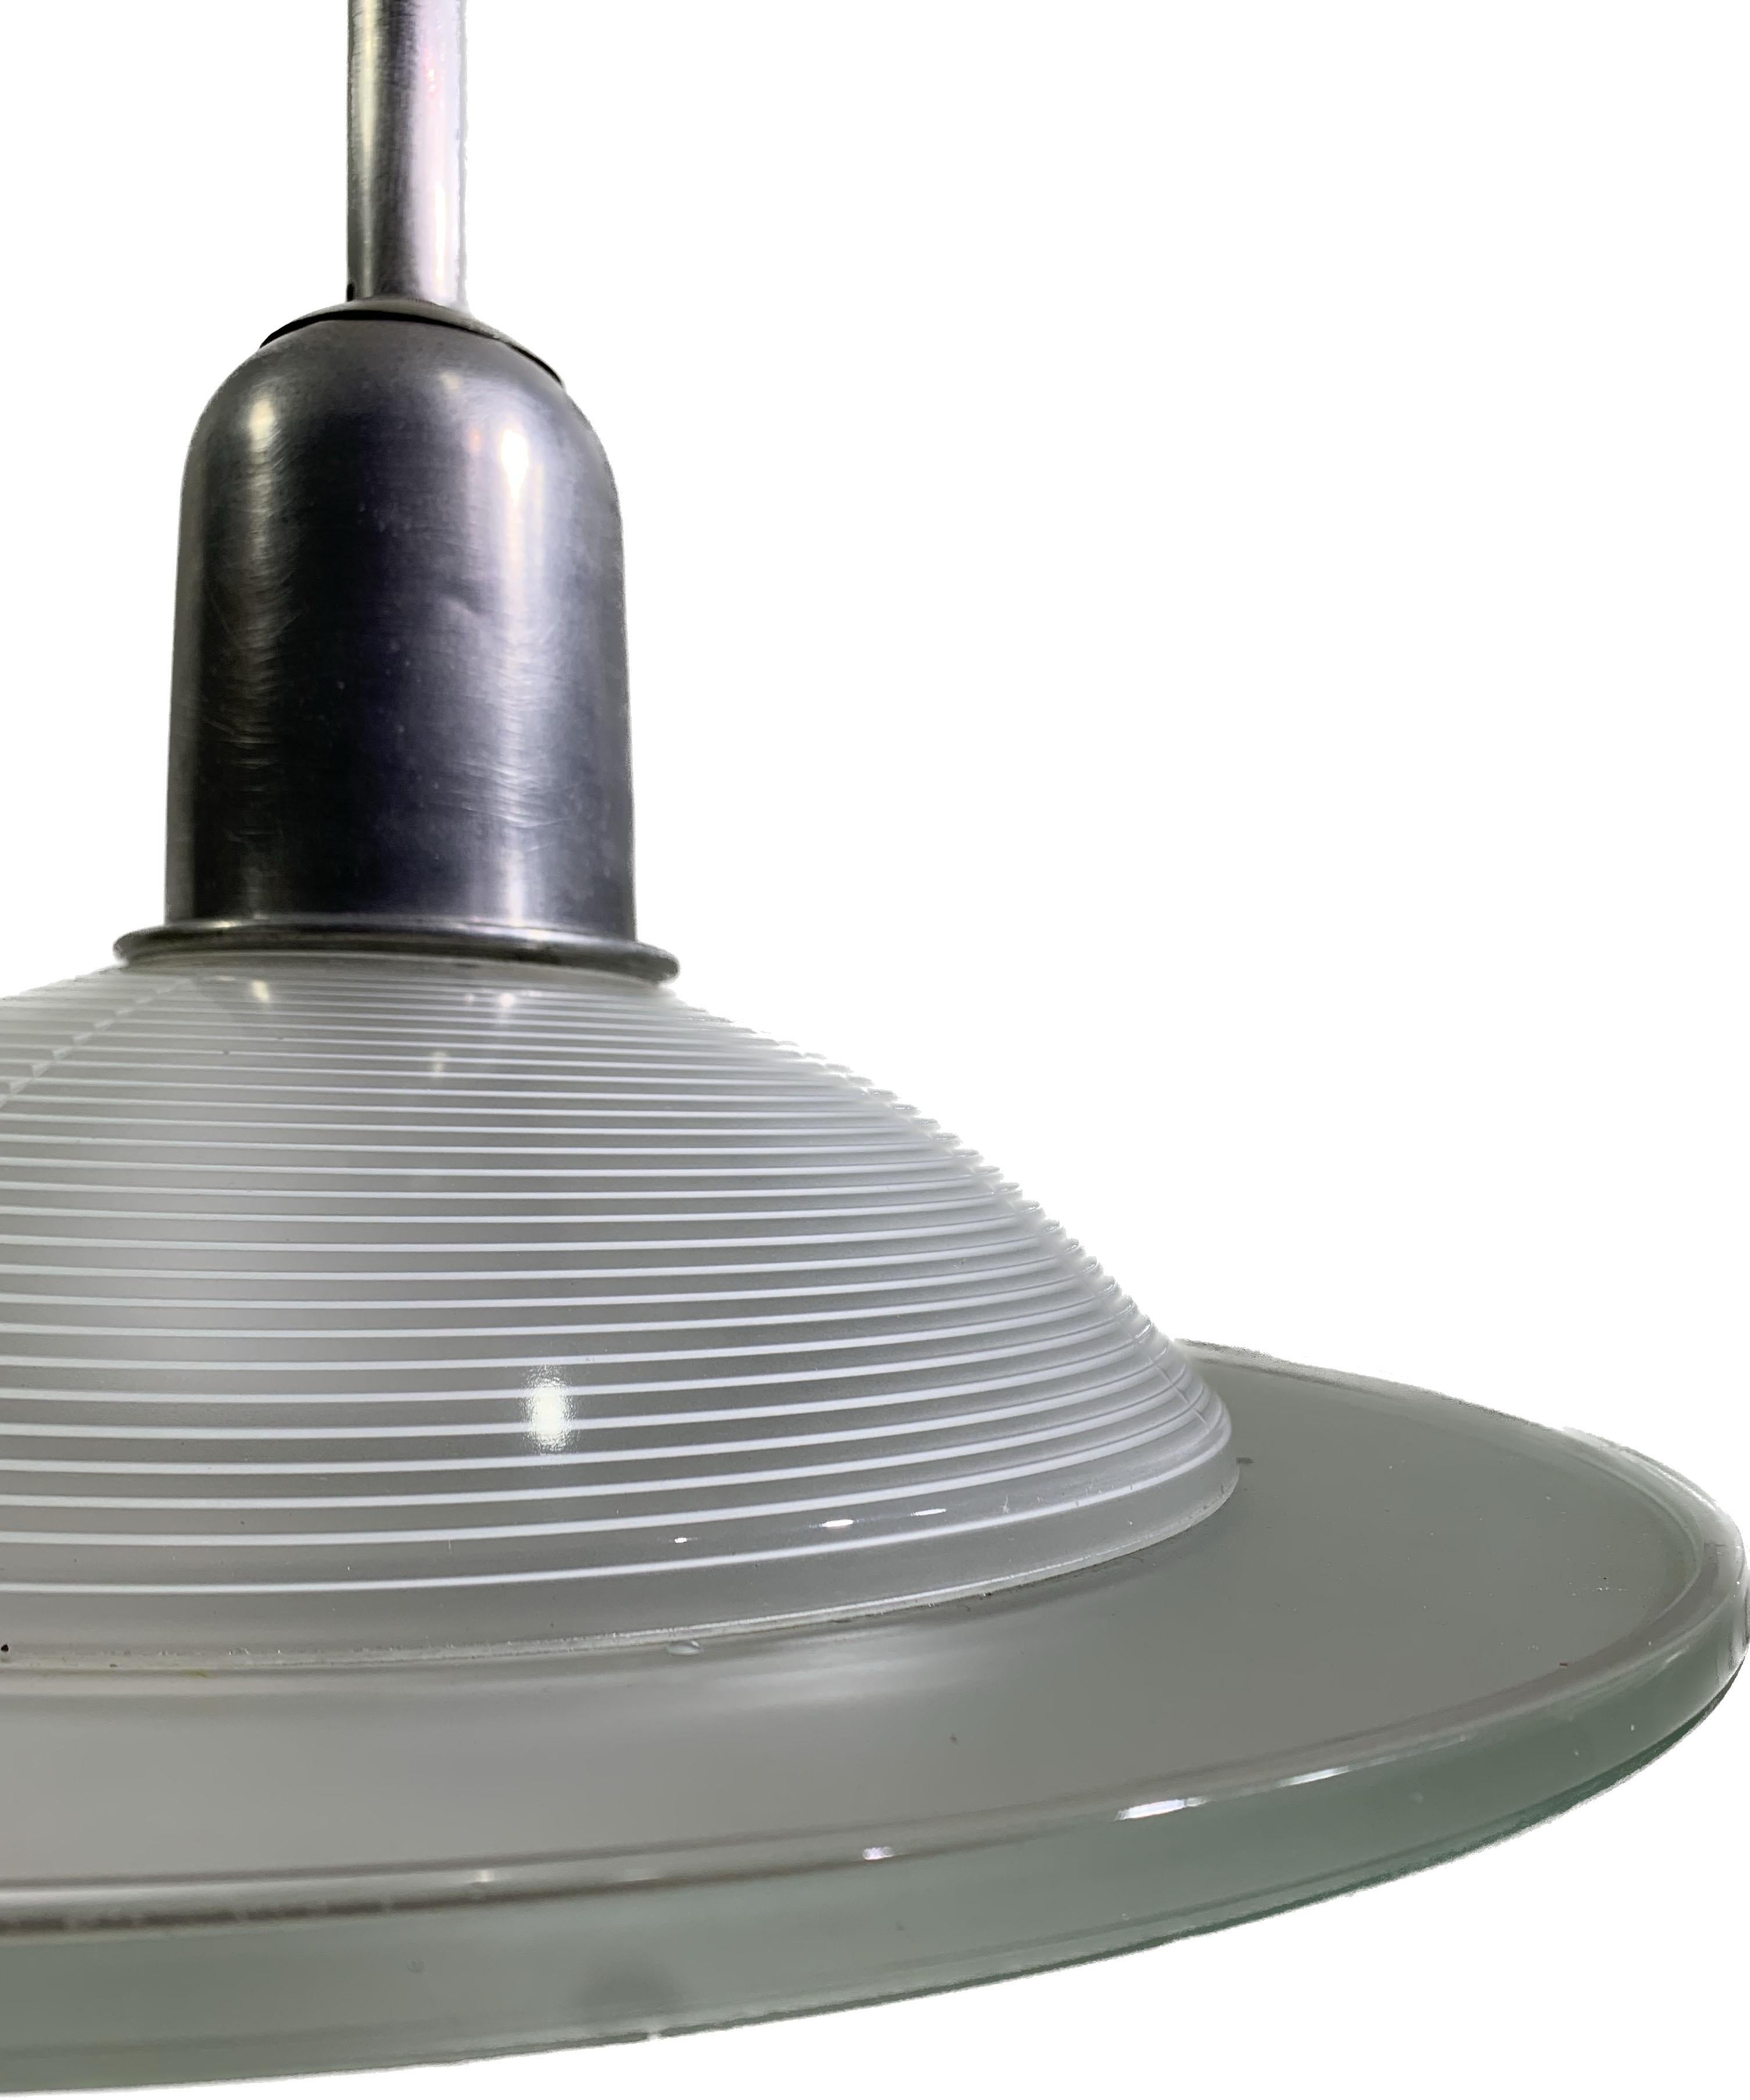 Ceiling pending fixture  made with a structured iron rigid rod and that has a large elegant striped opalescent glass. It is a very elegant and timeless piece.
Can be delivered and wired for American (110v) or European (220v) use upon request, the